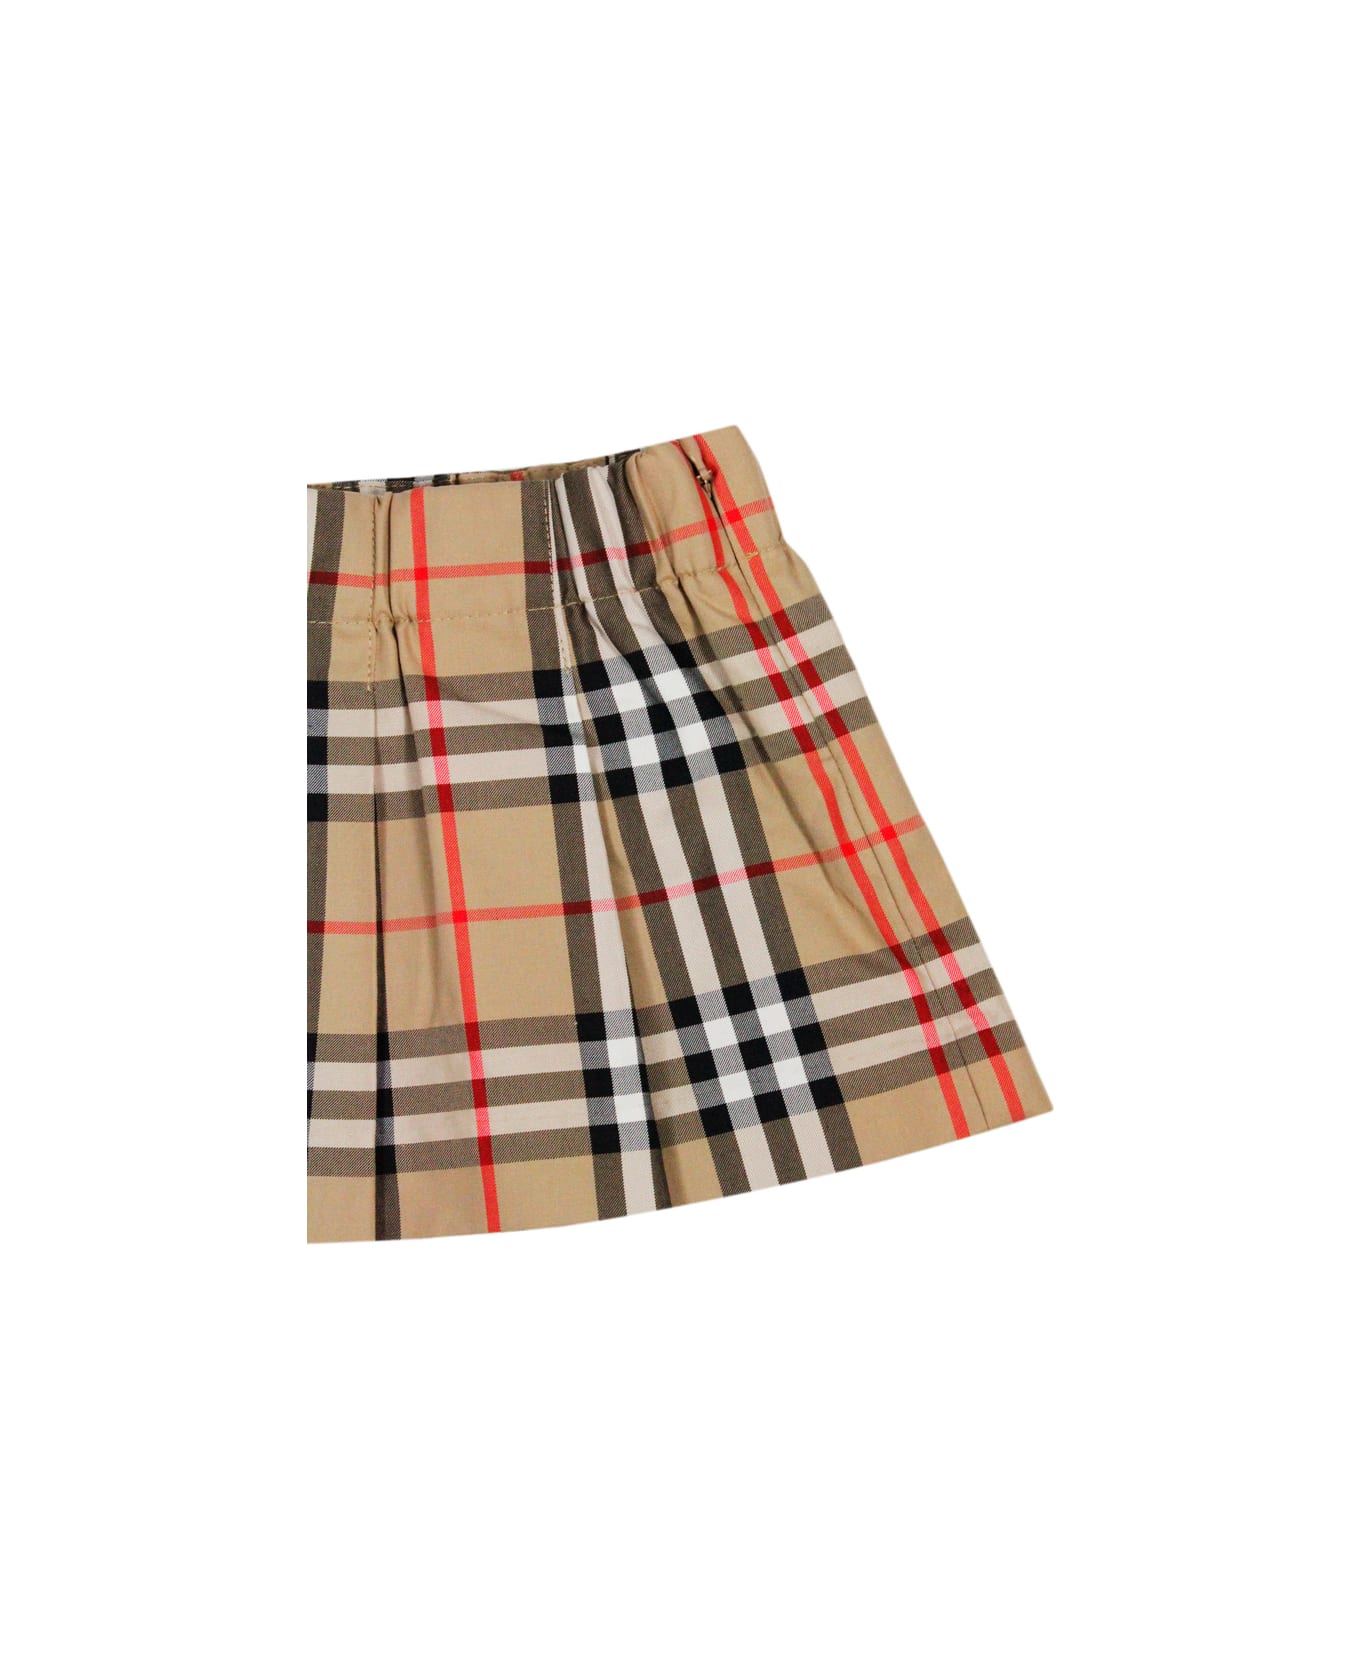 Burberry Pleated Cotton Skirt With Check Pattern With Elastic Waist And Side Zip Closure - Beige